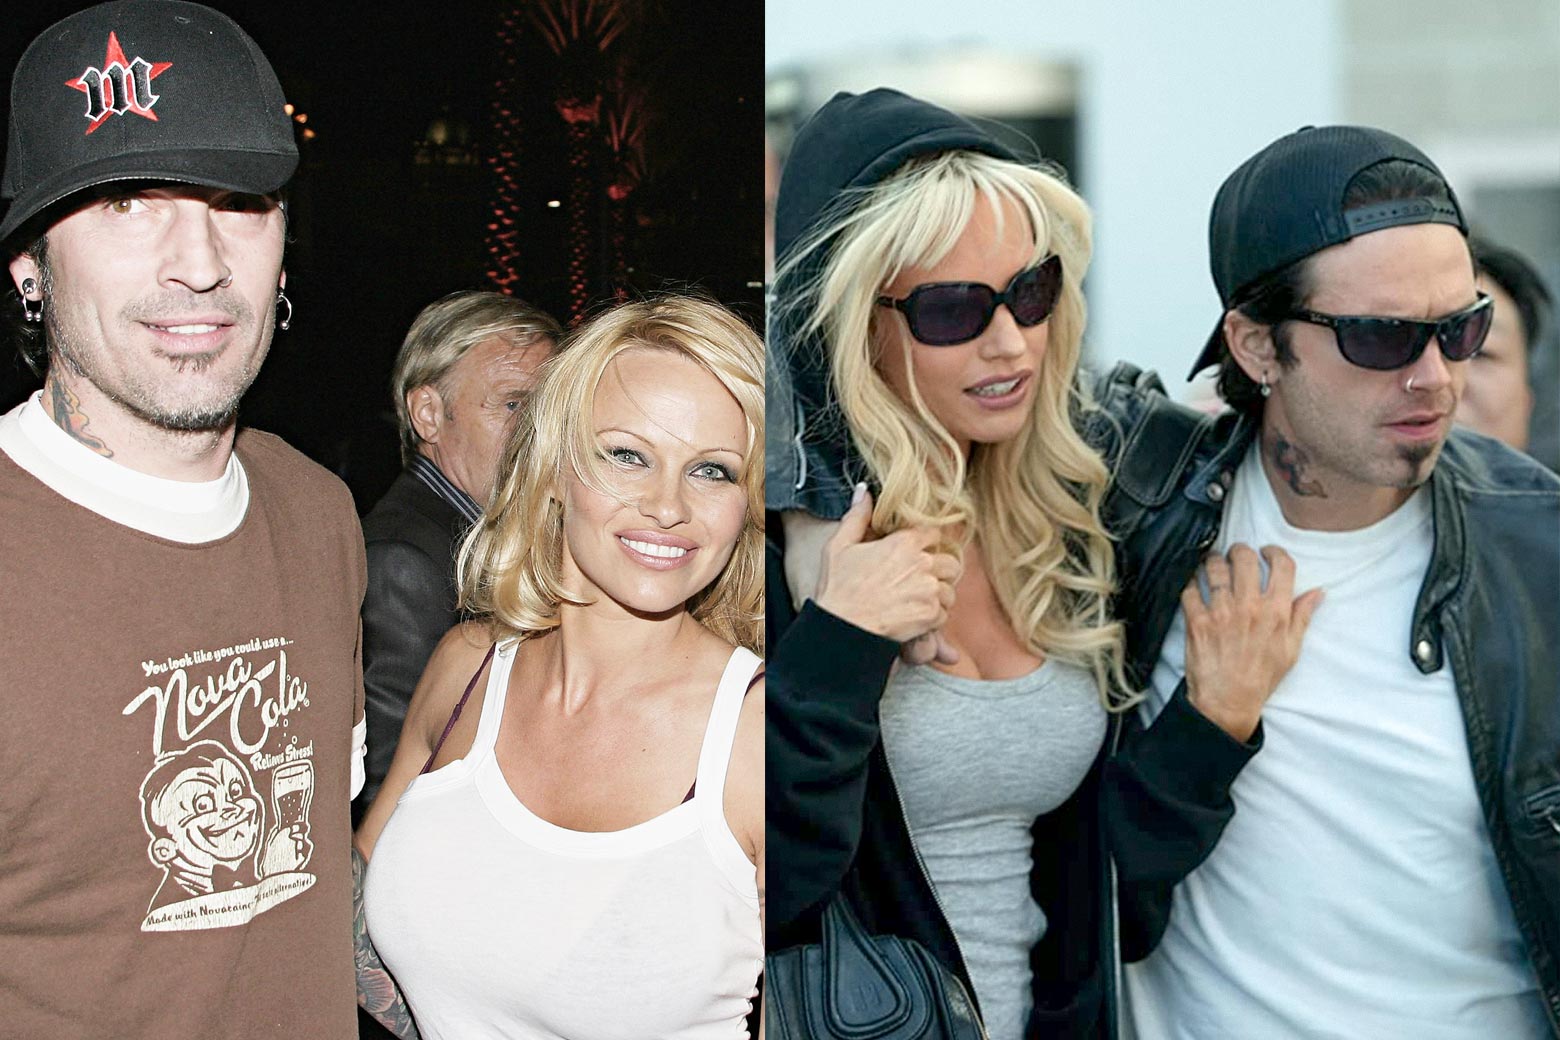 Pam and Tommy accuracy whats fact and whats fiction in the Hulu miniseries about Pamela Anderson and Tommy Lee. picture